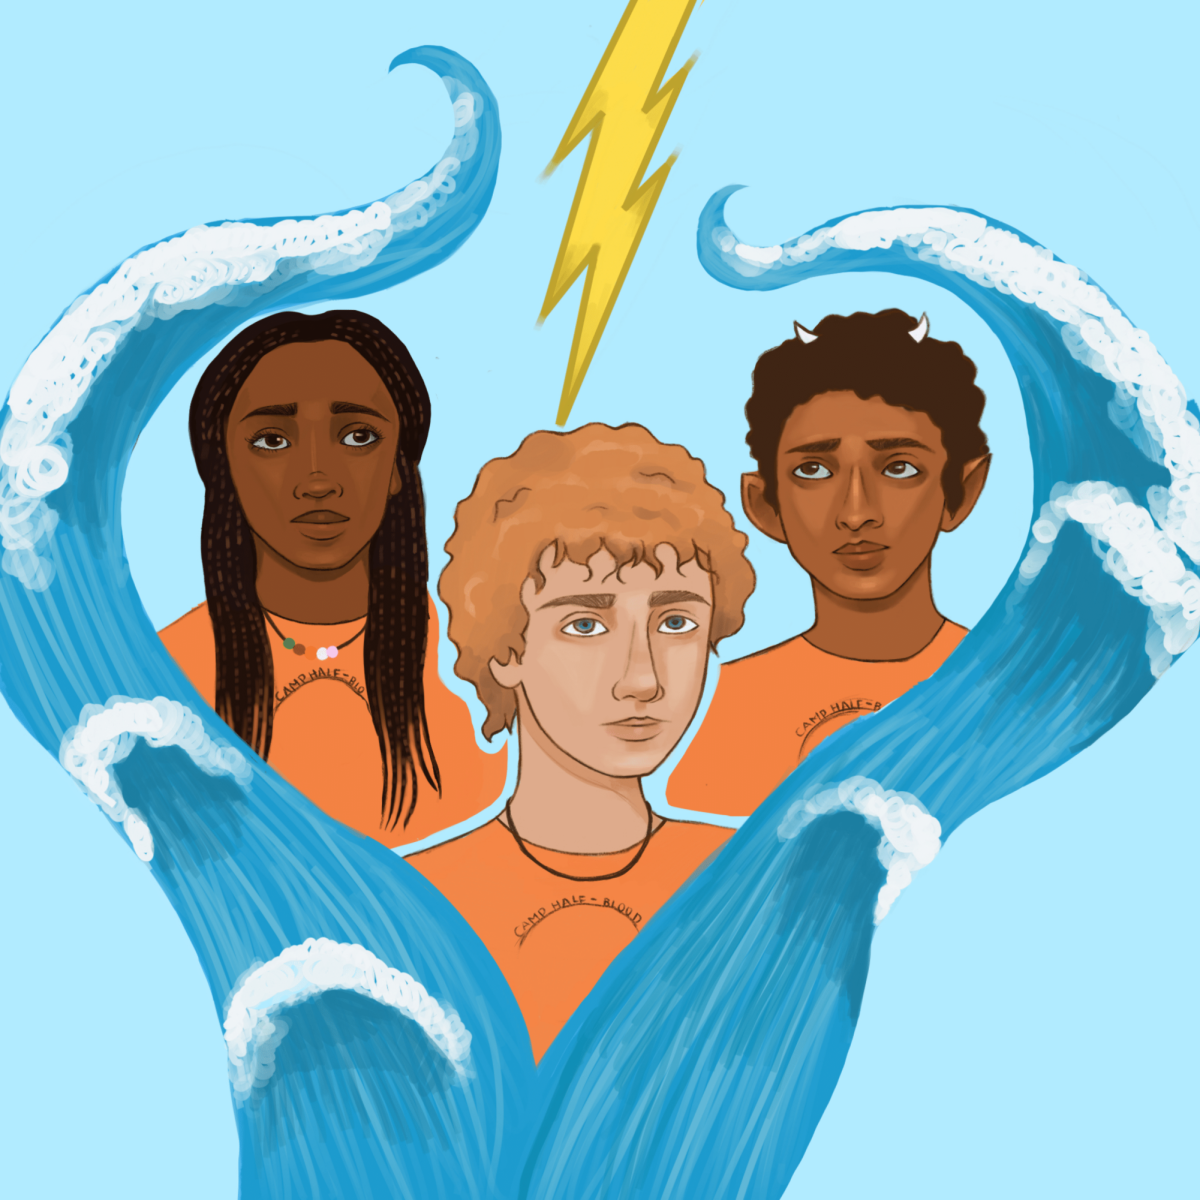 From left to right, Annabeth, Percy and Grover embark on the treacherous journey to retrieve the master bolt in the new Disney+ series “Percy Jackson and the Olympians”. The series comes nearly 20 years after the book was published.